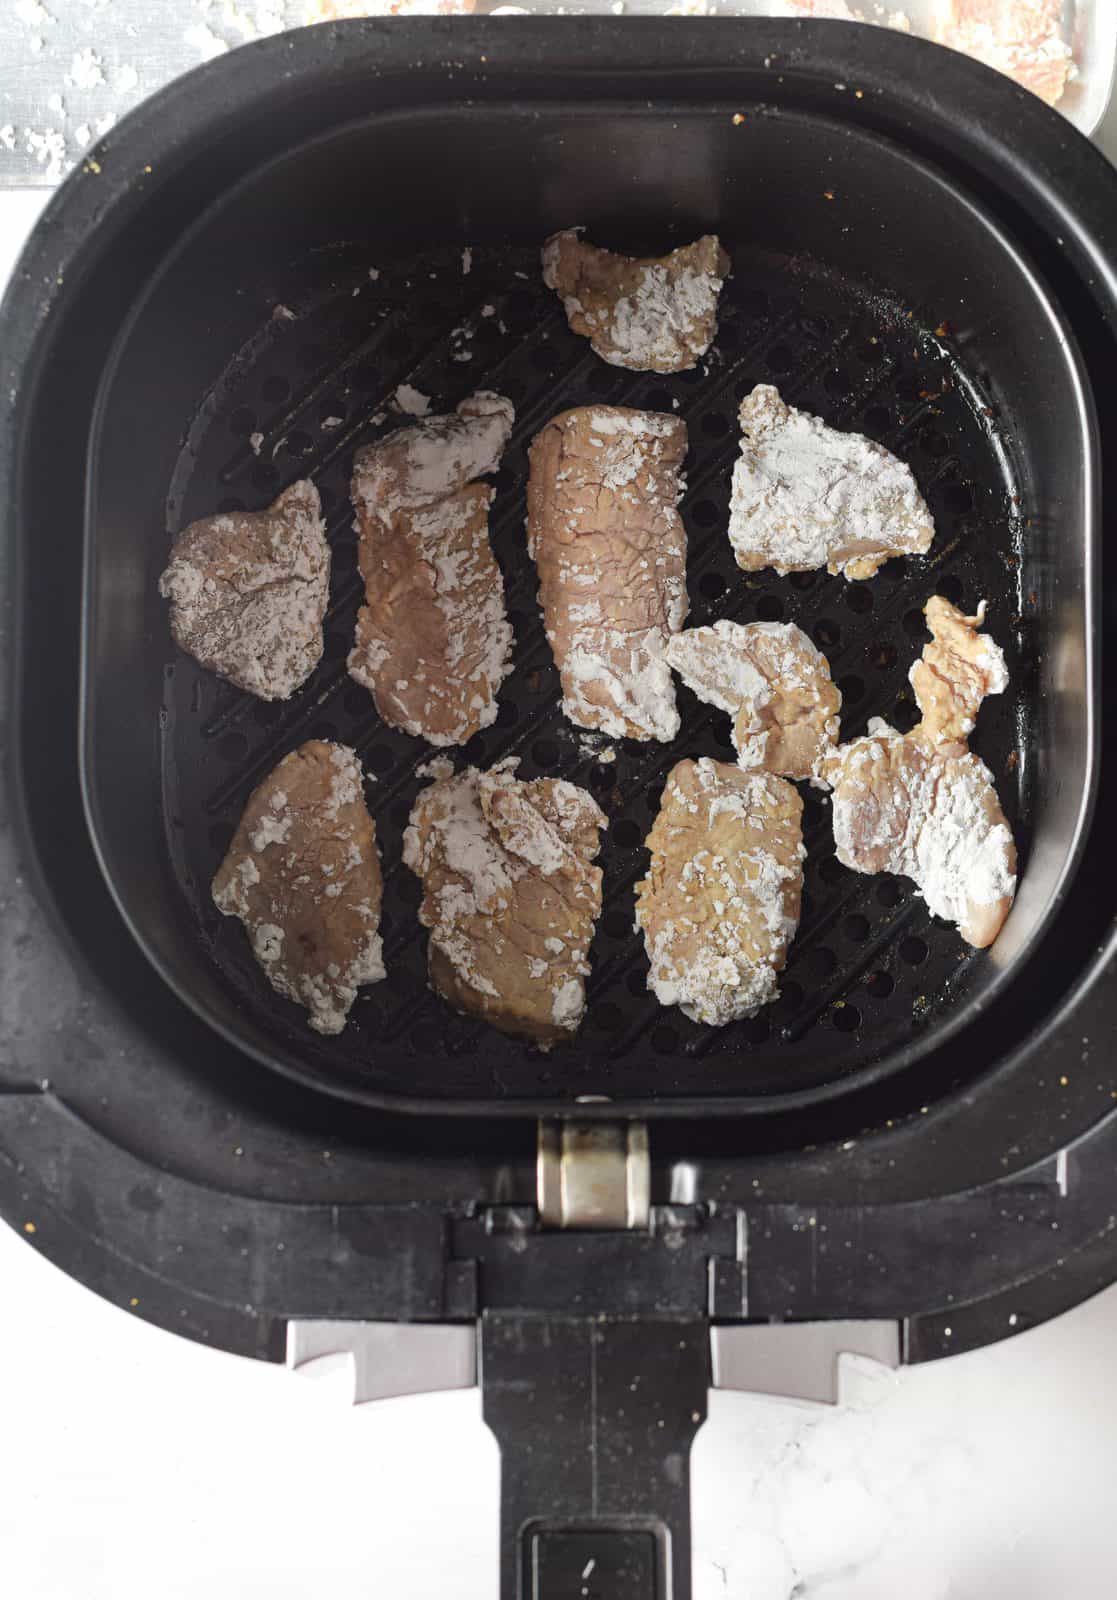 chicken pieces shown (before cooking) in the basket of an air fryer.